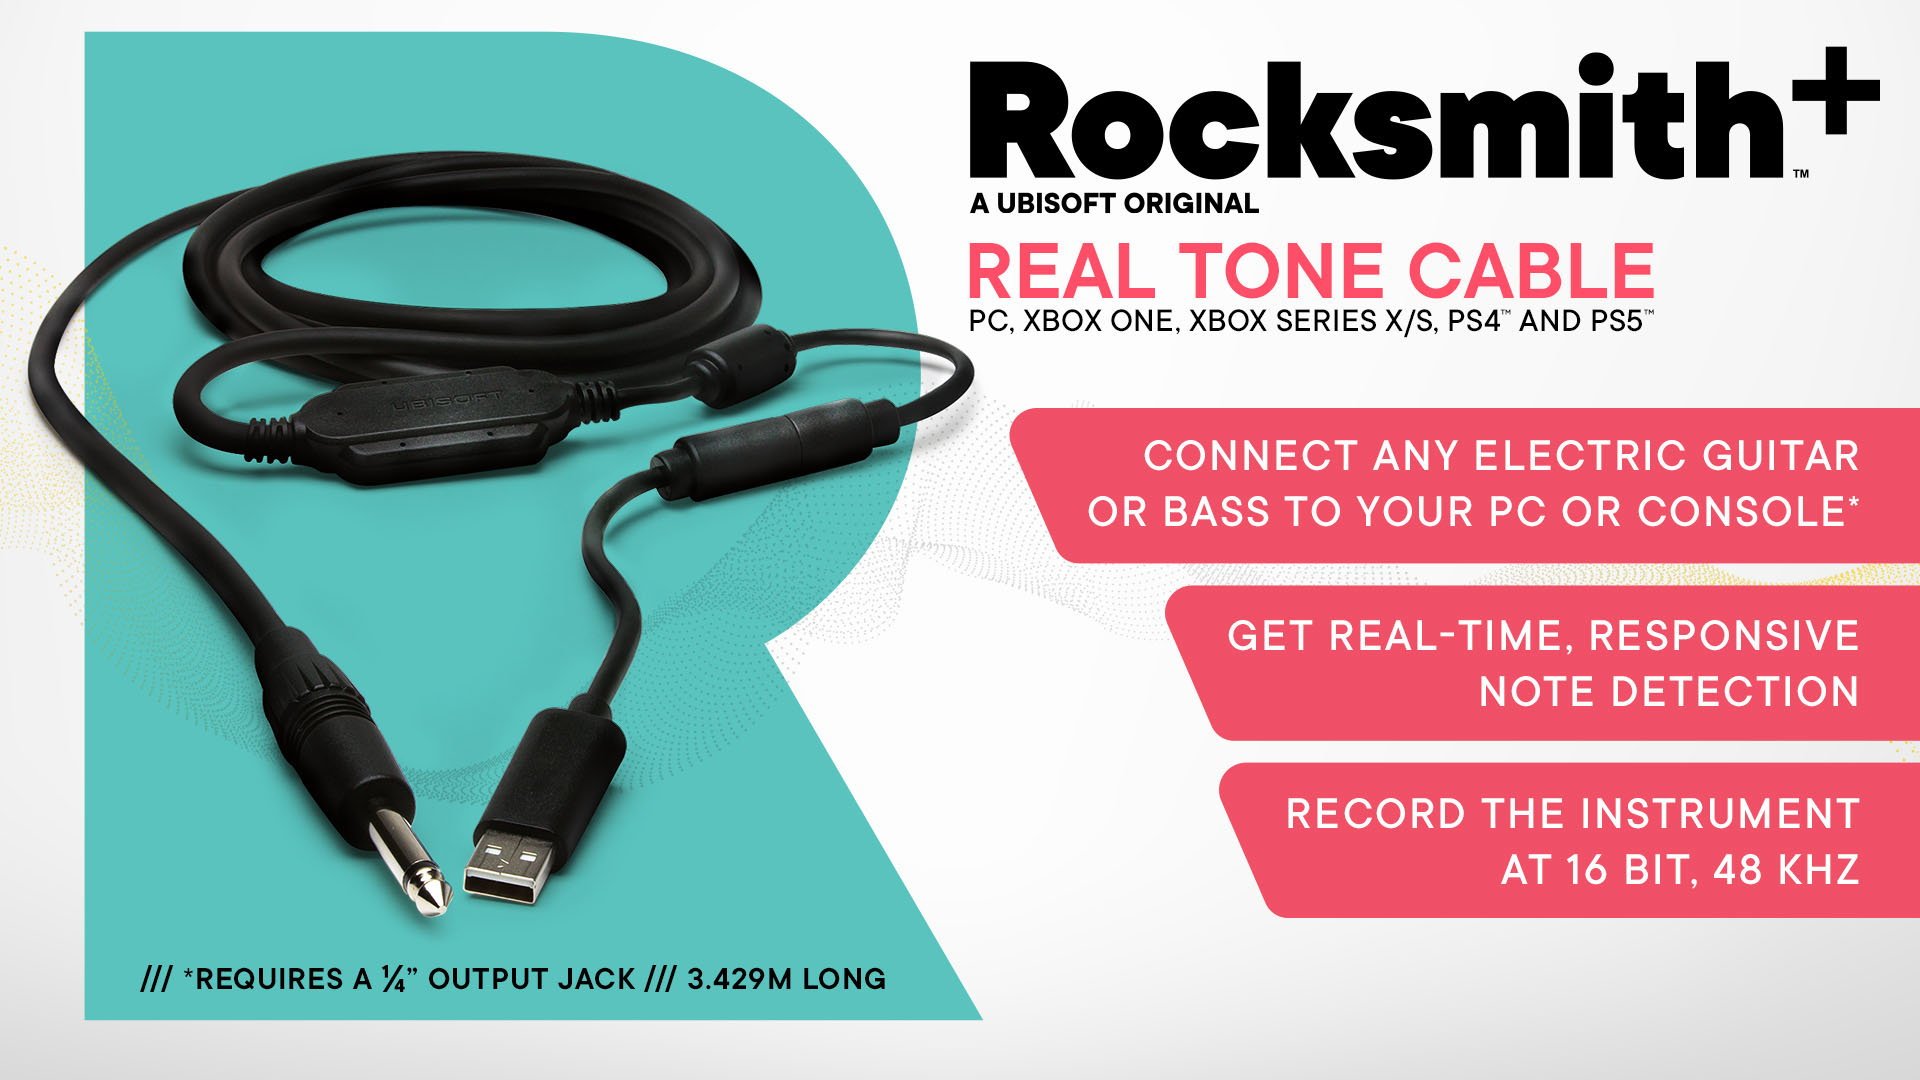 Cable Rocksmith™ 2014